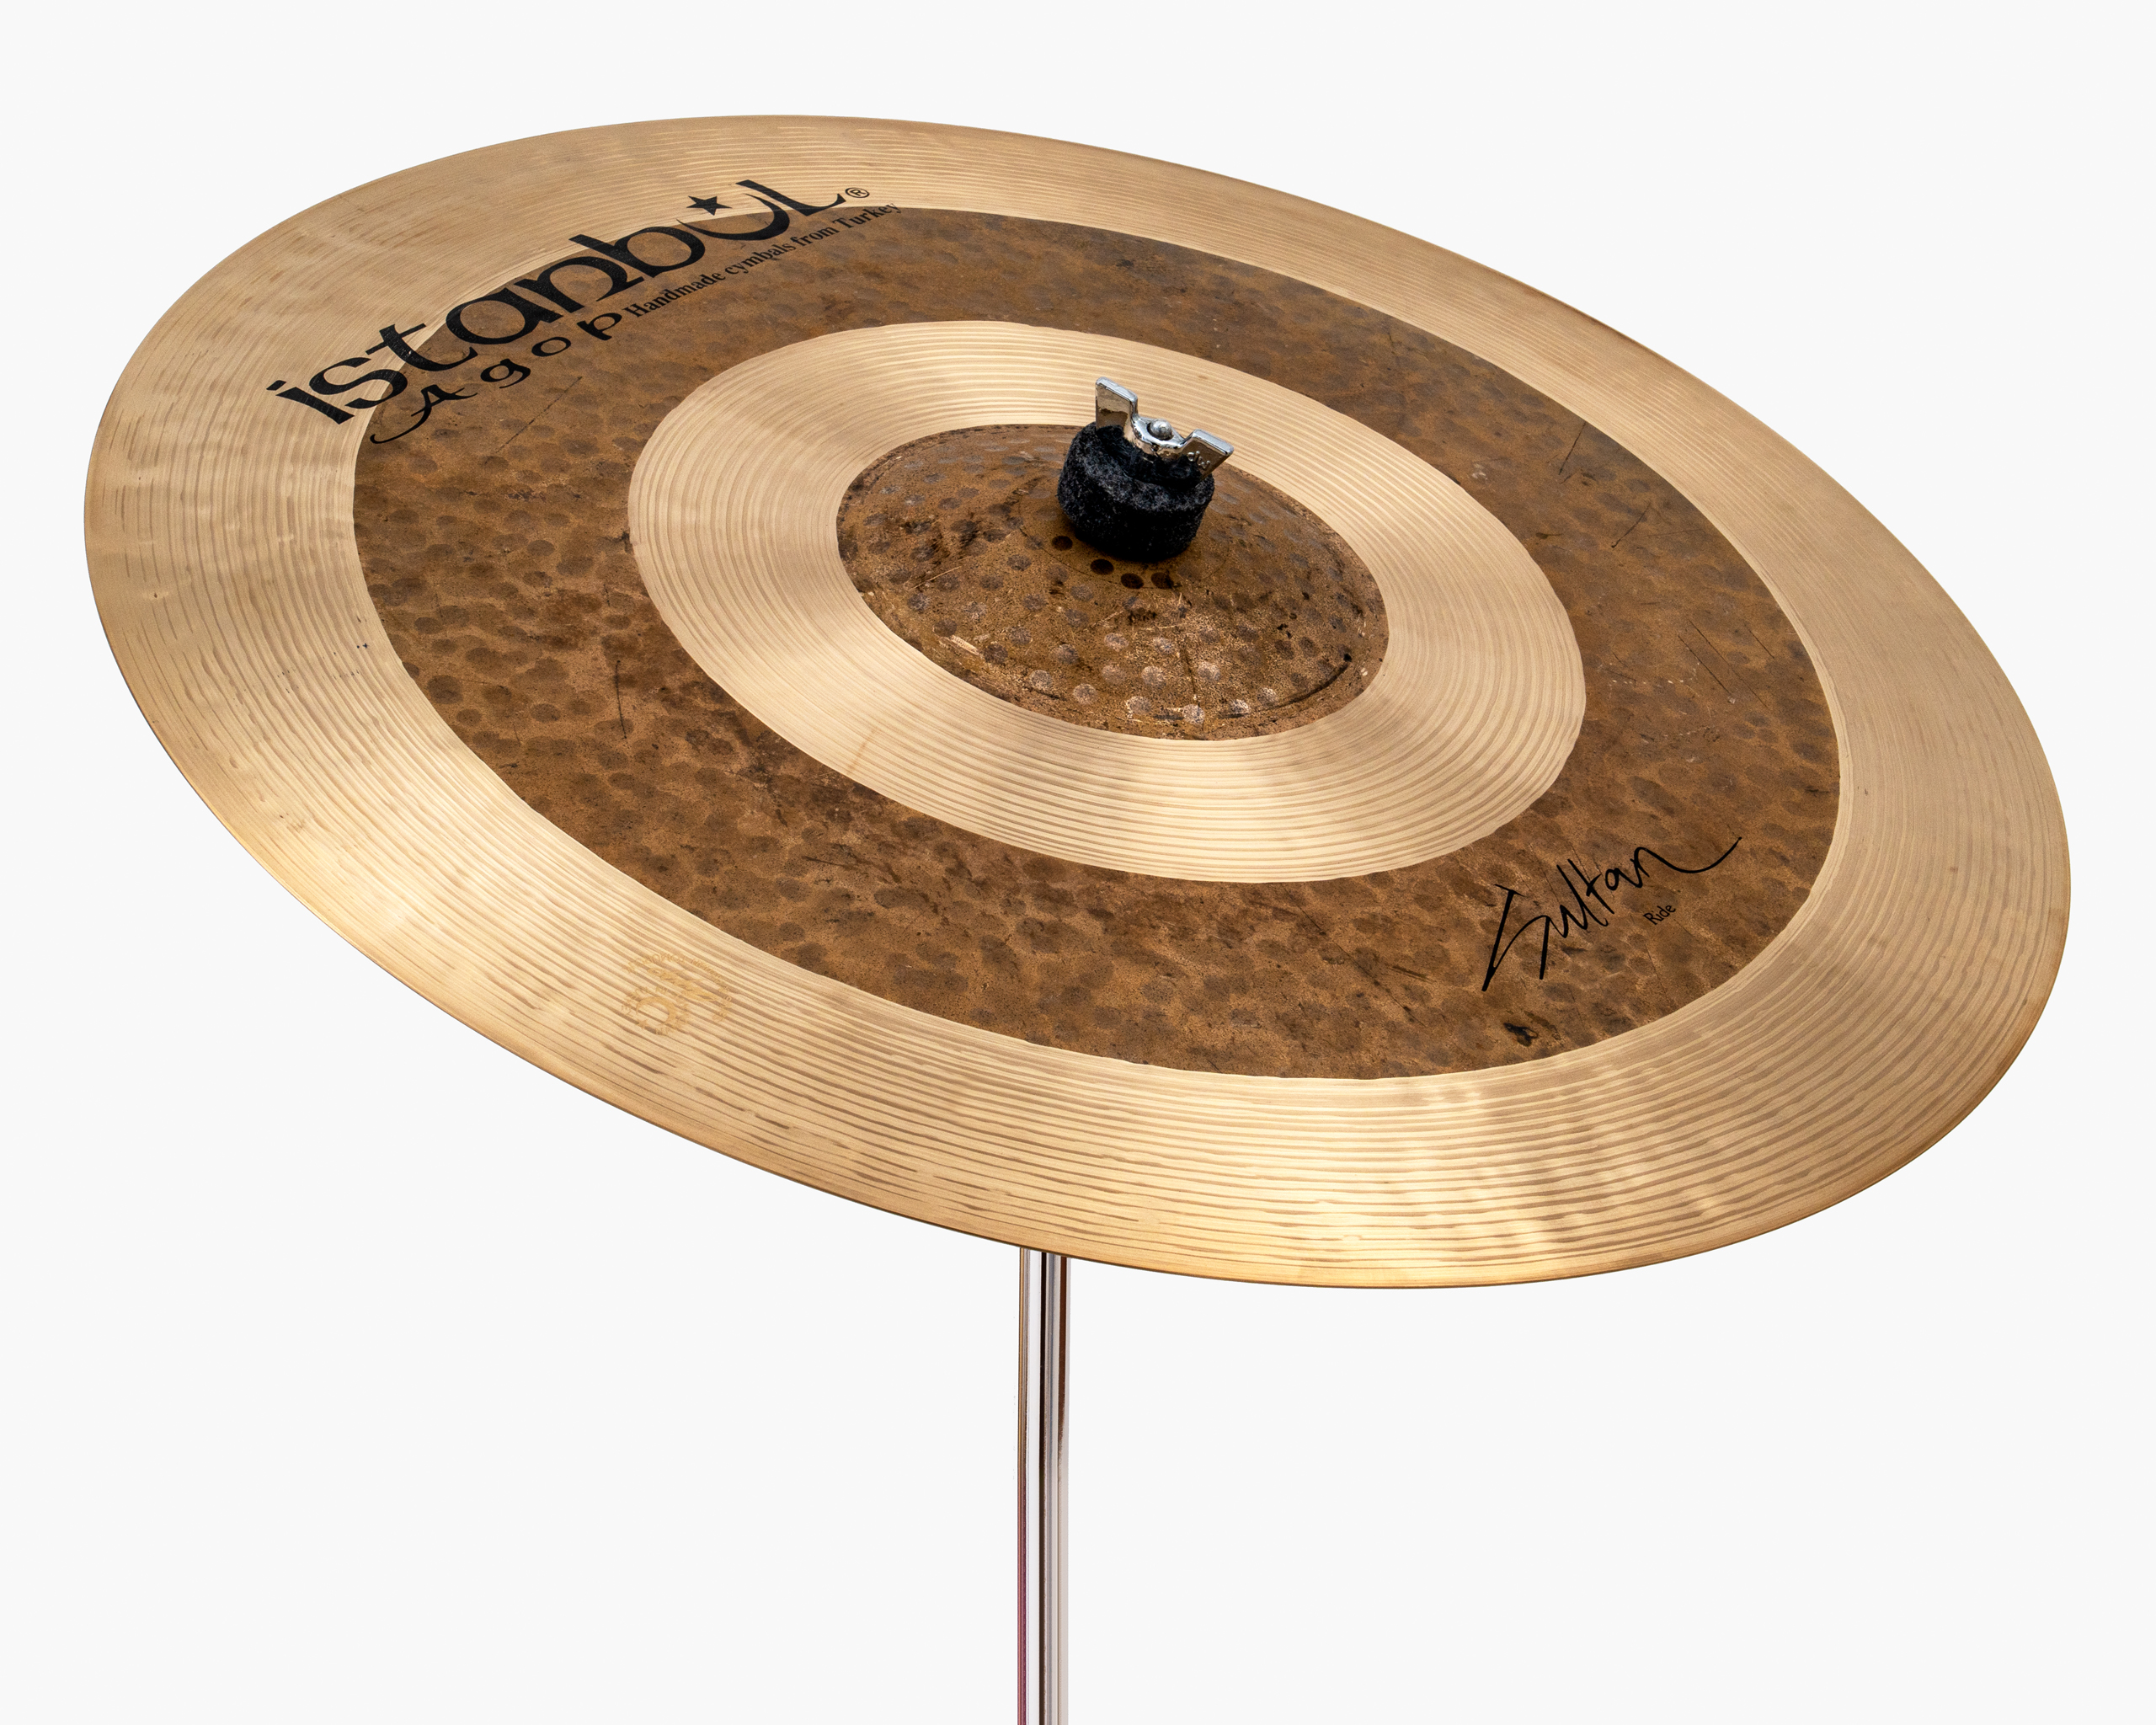 Sultan Set – Istanbul Cymbals